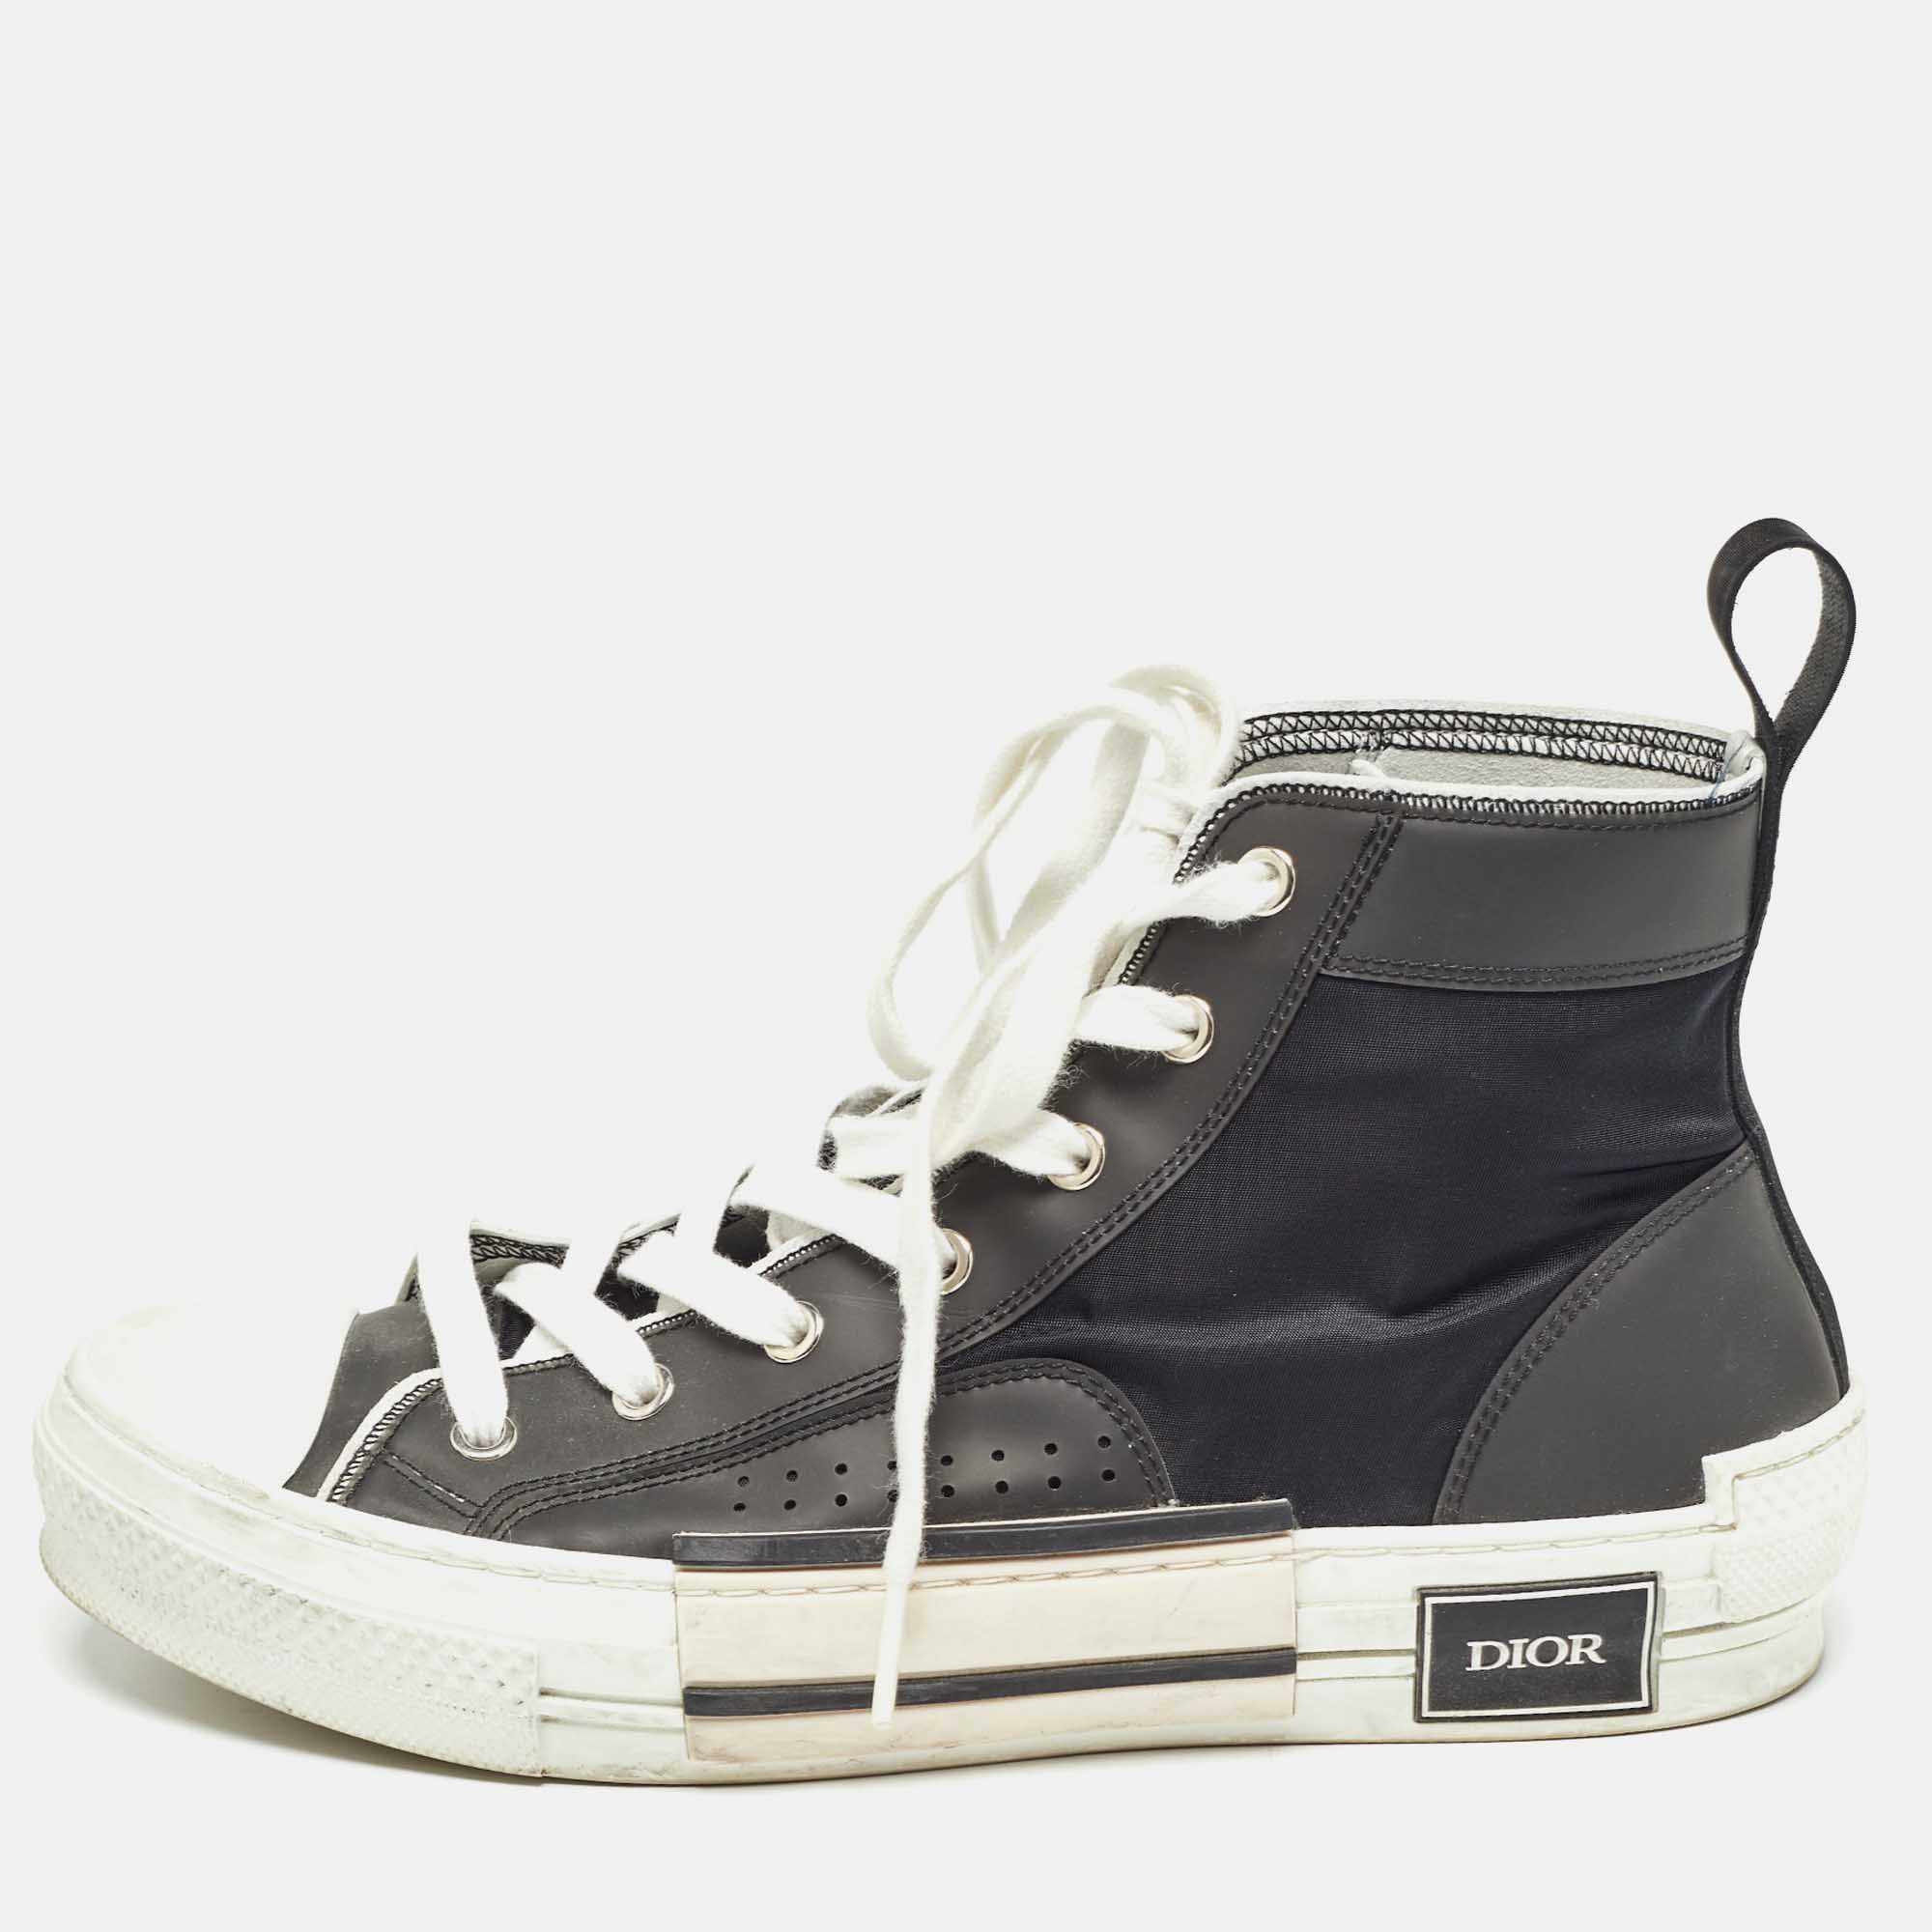 Dior black nylon and leather b23 high top sneakers size 40.5